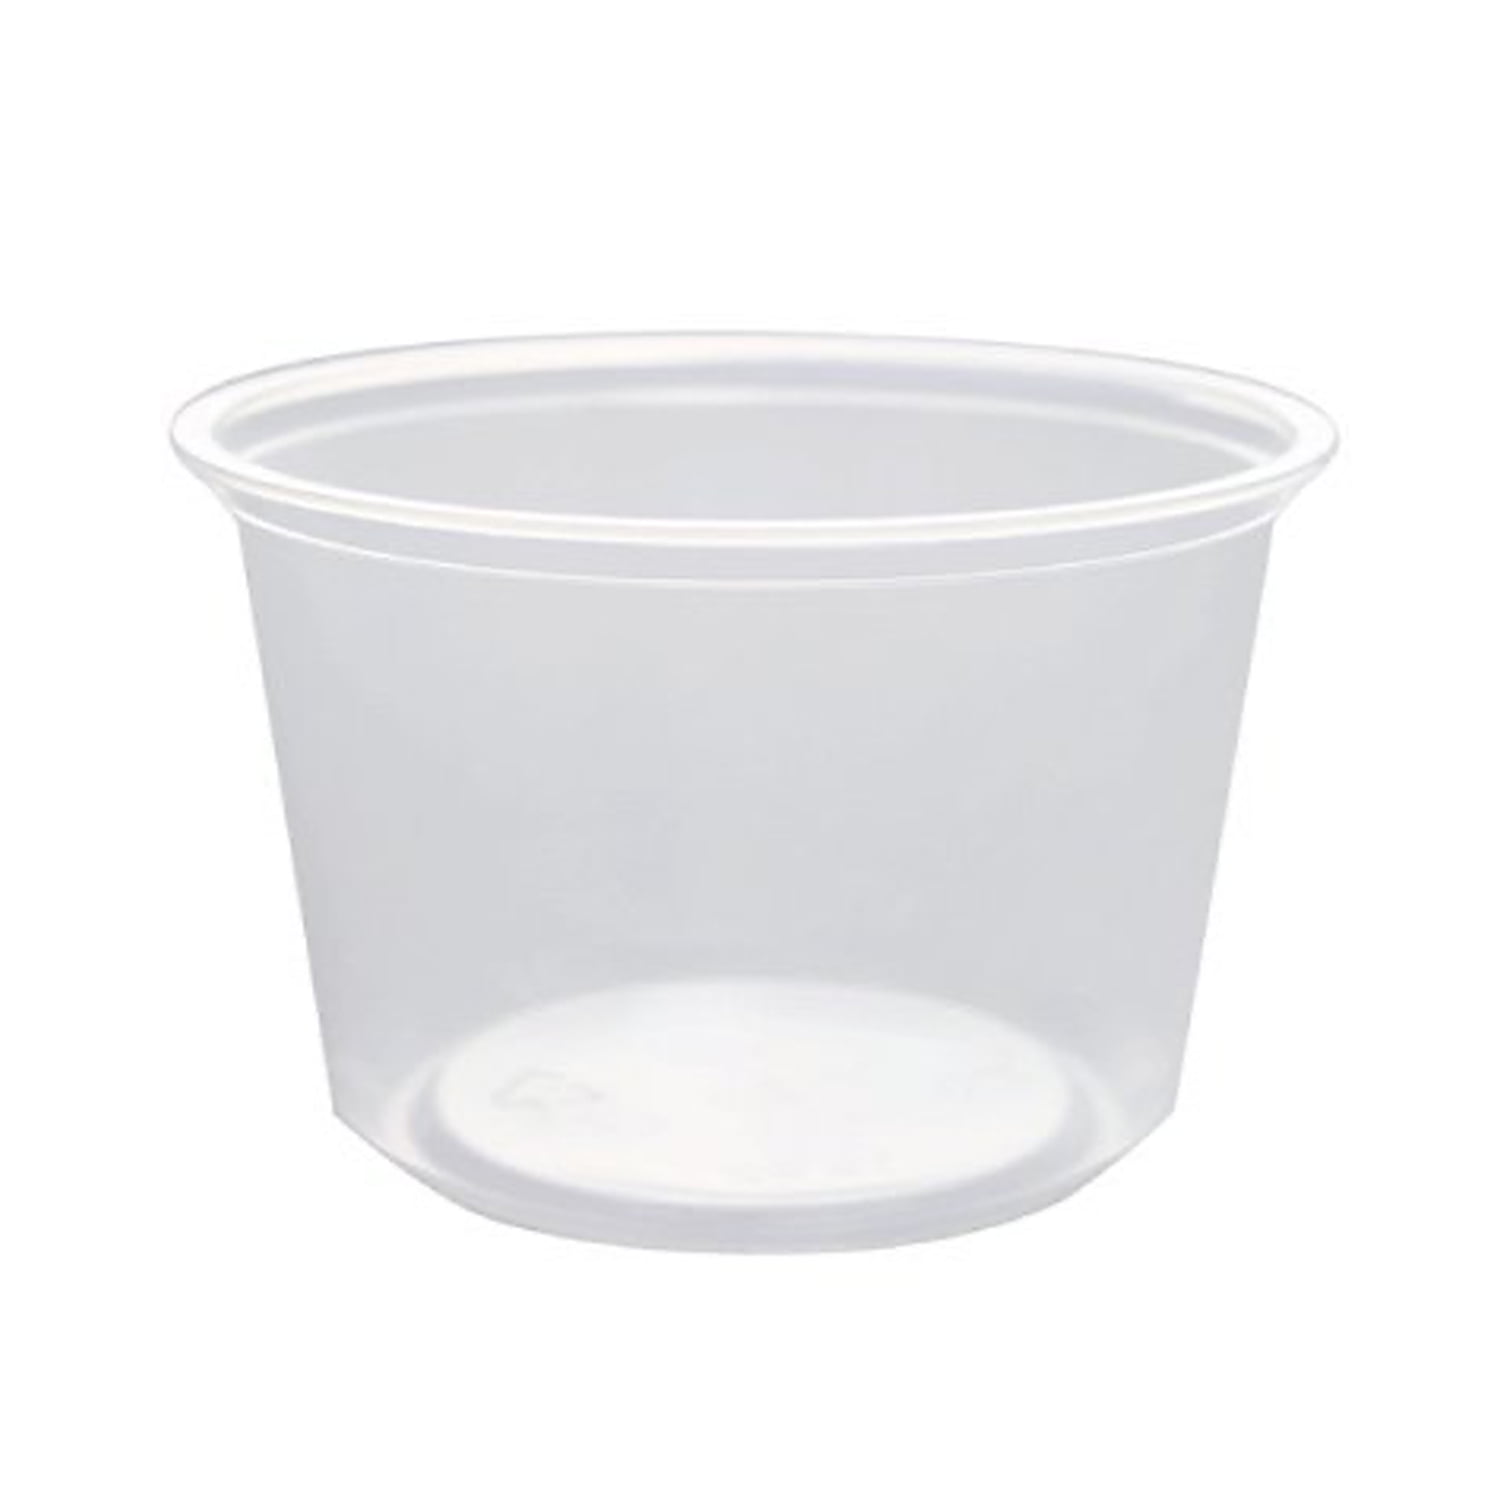 Deli Container - 16 oz [500 QTY] – Bakers Authority